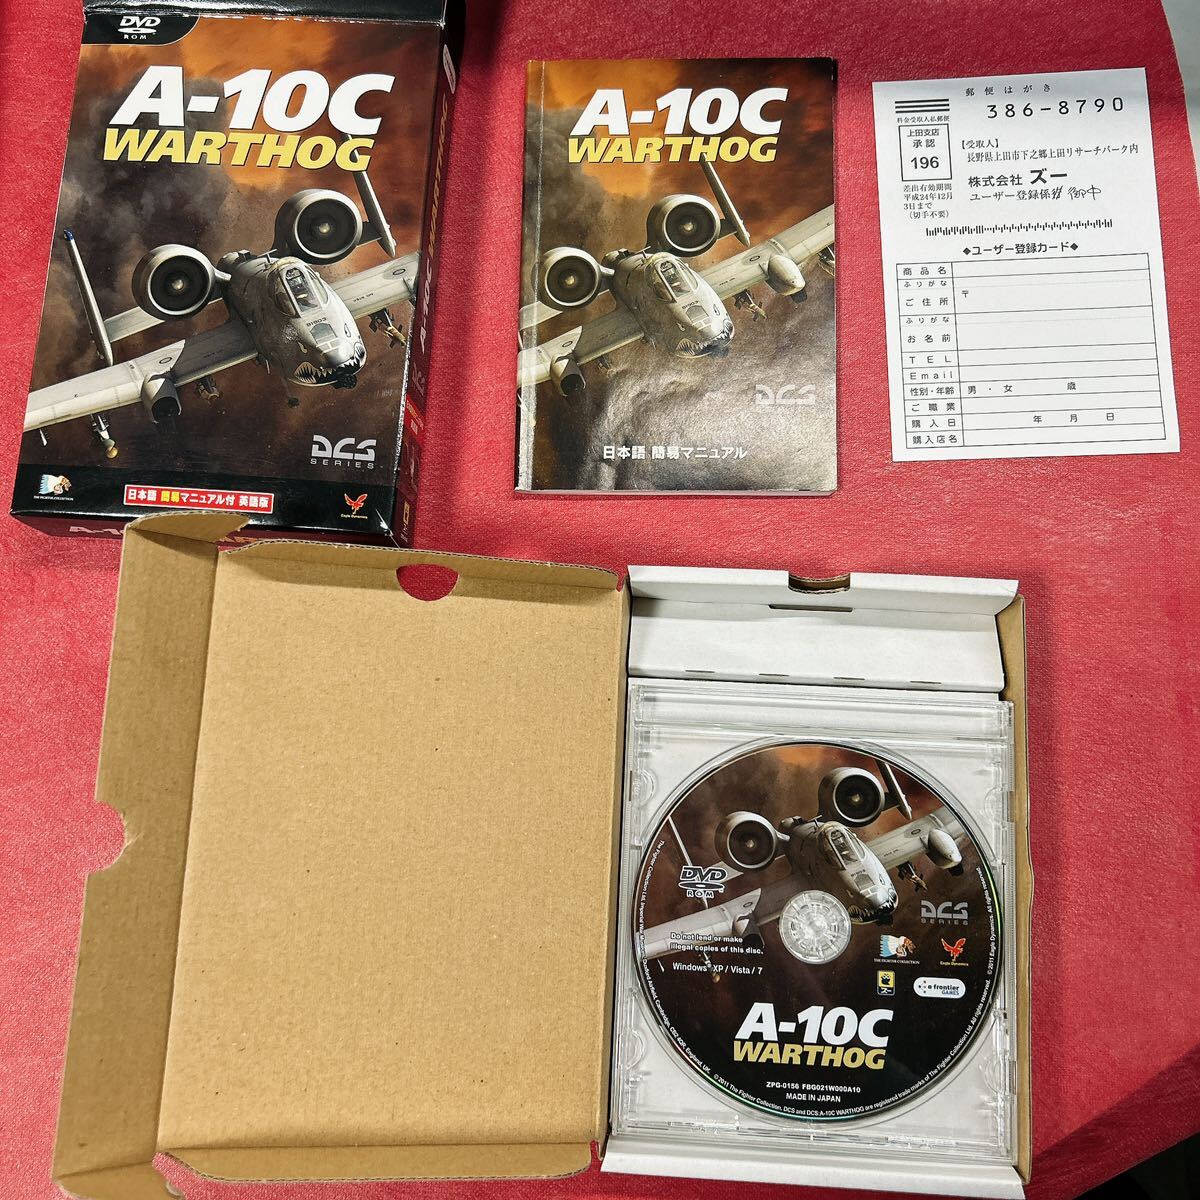 DCS:A-10C War to ho g Japanese simple manual attaching English version 